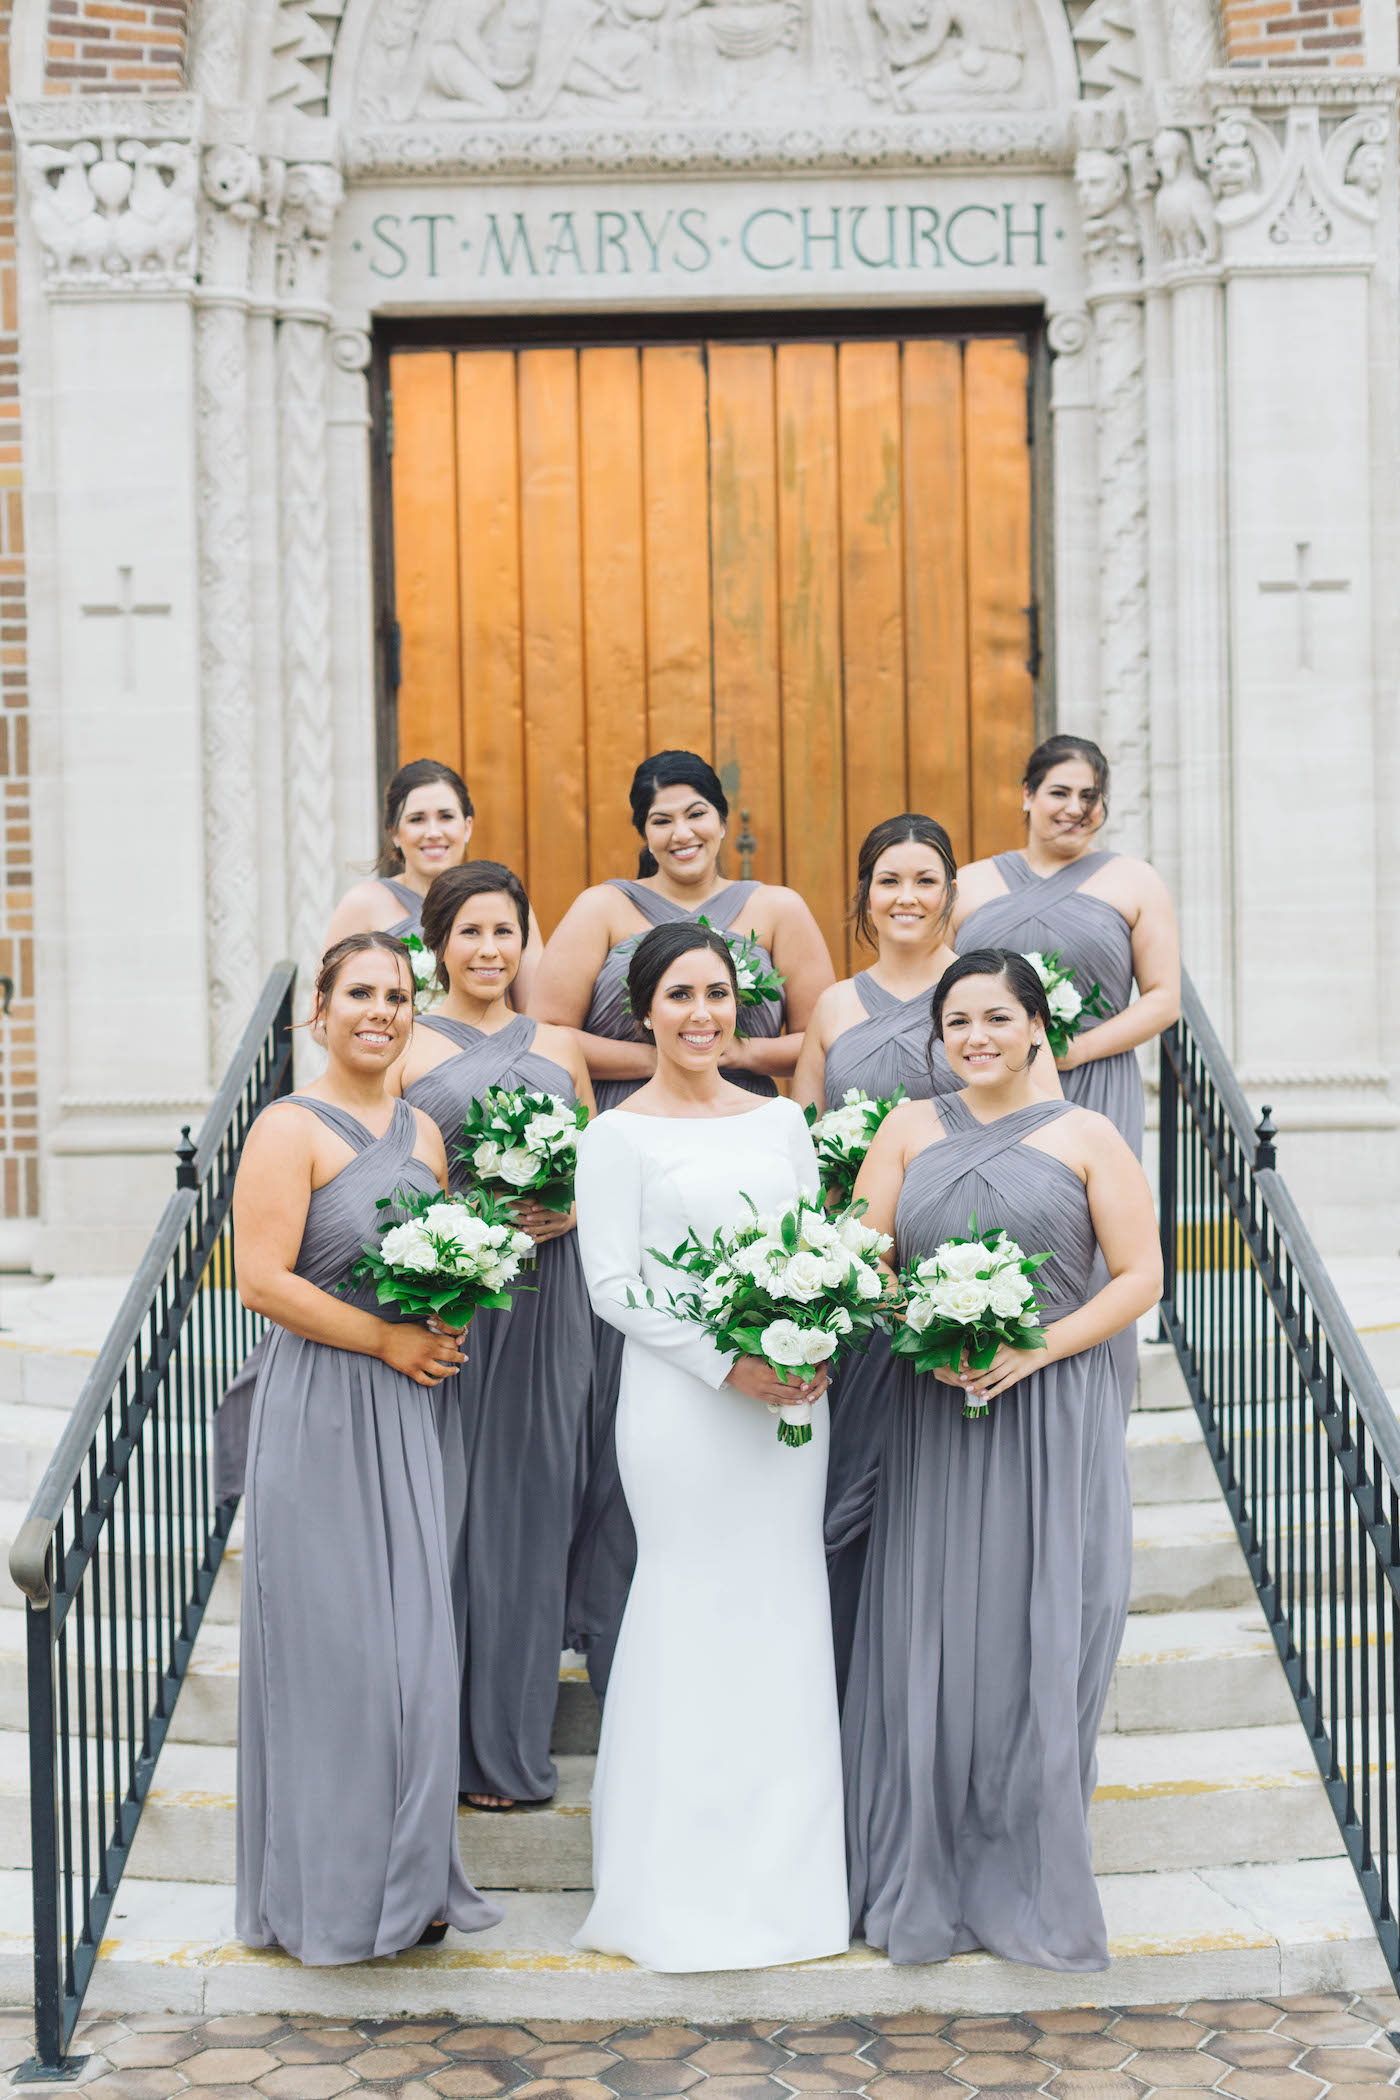 Florida Wedding Bridal Party Portrait, Bridesmaids Wearing Matching Long Dark Slate Gray Watters Dresses, Bride Wearing Timeless White Mikaella Bridal Wedding Dress, Holding Ivory and White Floral Bouquet | St. Petersburg Wedding Venue St. Mary Our Lady of Grace Catholic Church | Tampa Bay Wedding Planner Parties A'La Carte | Downtown St. Pete Wedding Florist Bruce Wayne Florals | South Tampa Bridesmaids Dress Shop Bella Bridesmaids